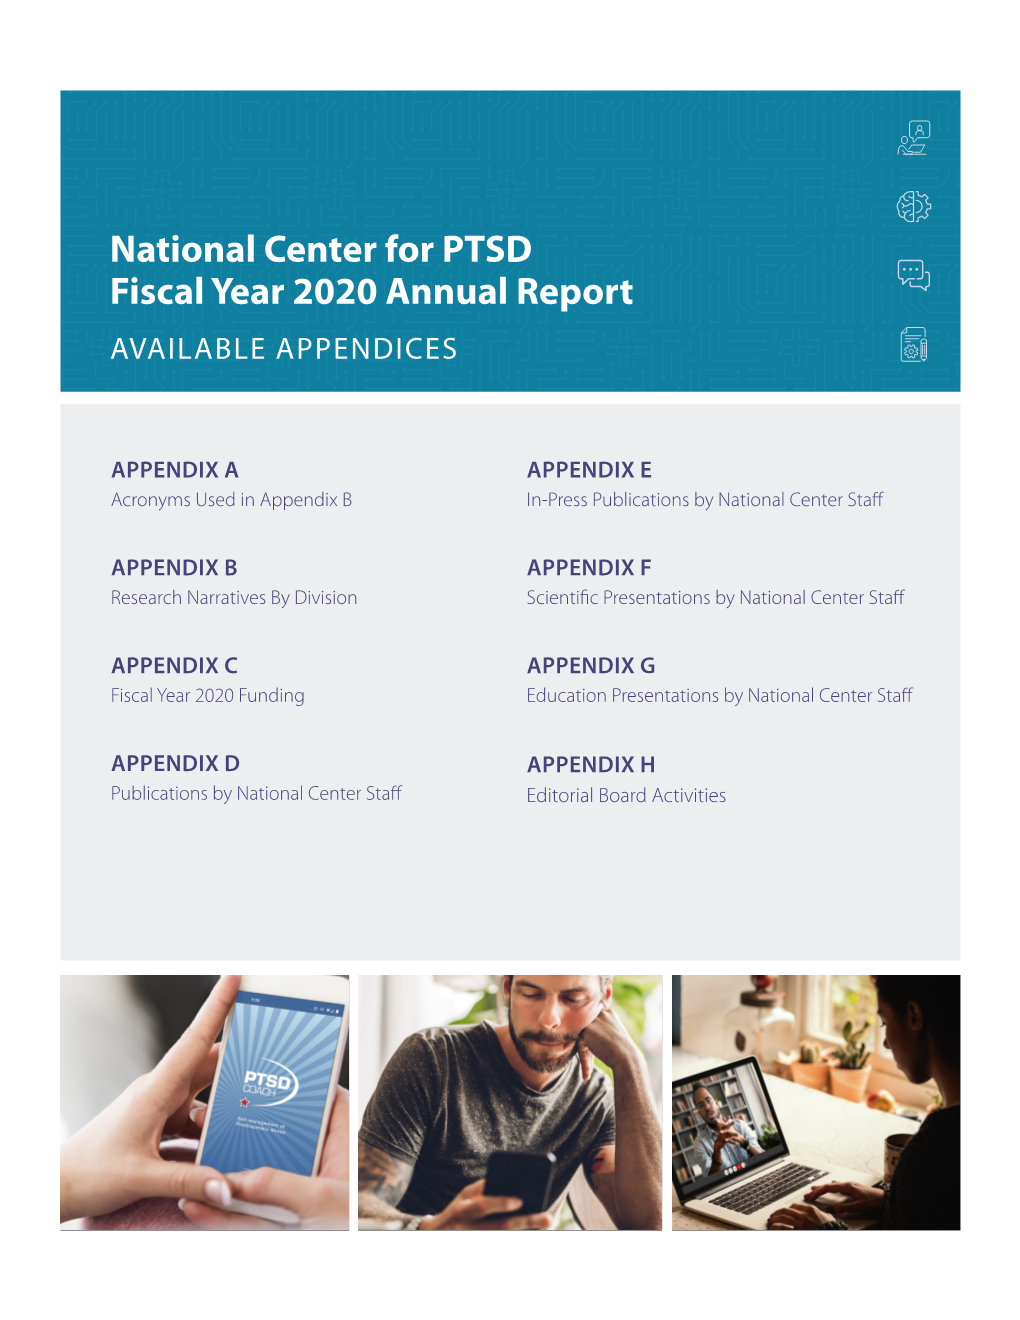 National Center for PTSD Fiscal Year 2020 Annual Report AVAILABLE APPENDICES